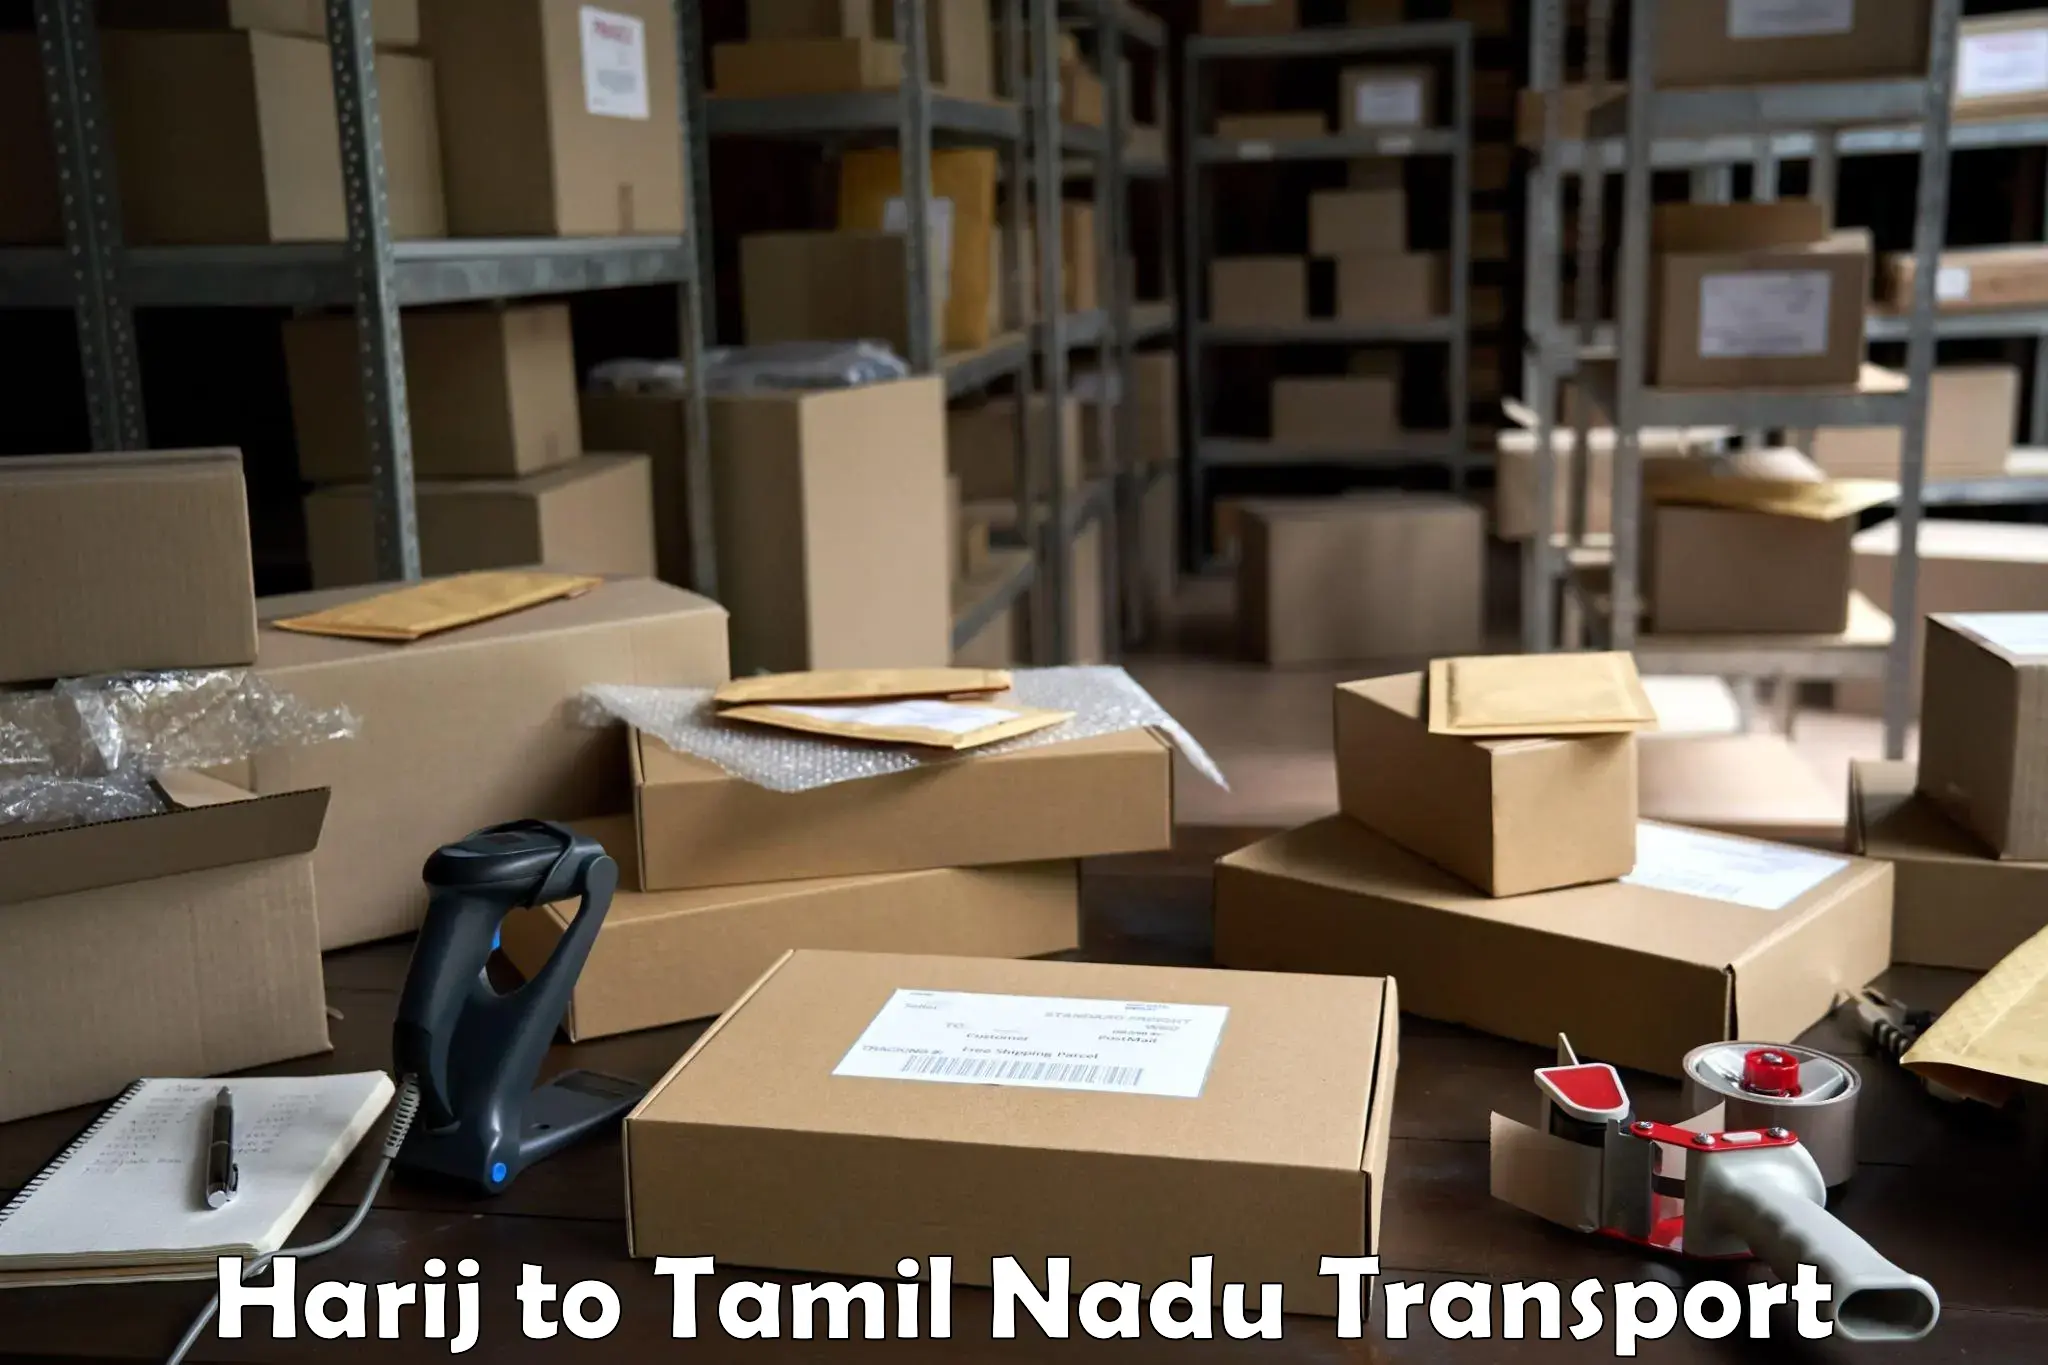 Air freight transport services Harij to Cuddalore